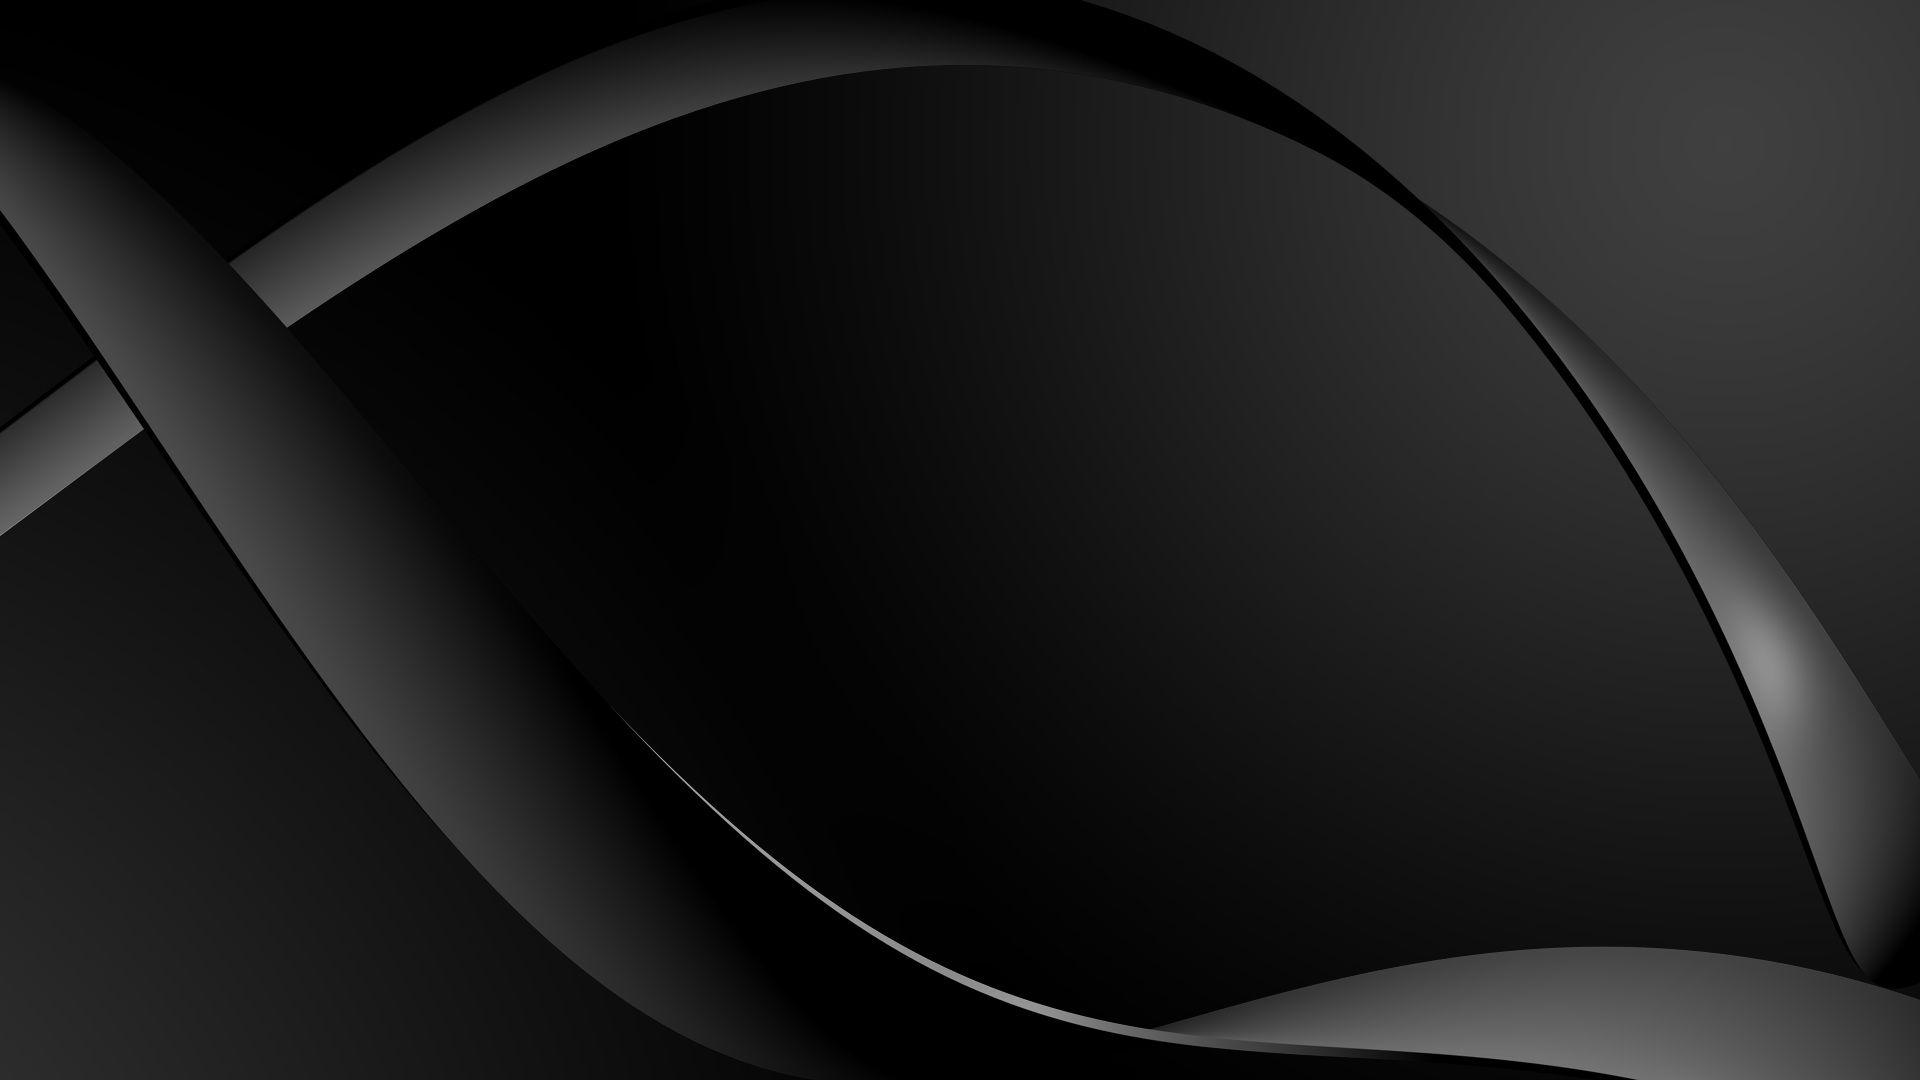 Free Black Waves Background For PowerPoint and Textures